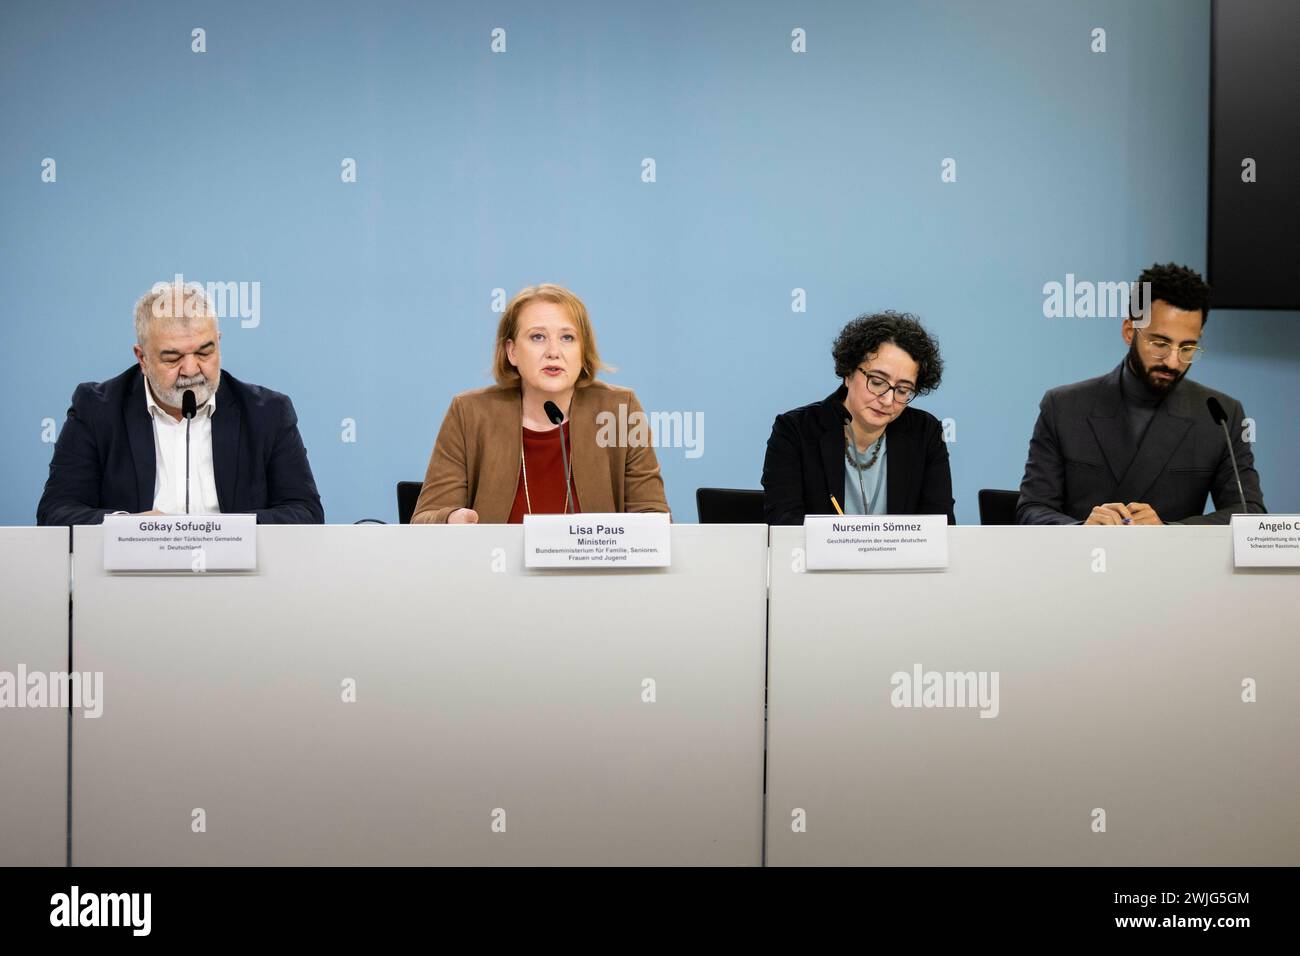 (from left to right) Goekay Sofuoglu, Federal Chairman of the Turkish Community in Germany, Lisa Paus (Buendnis 90/The Greens), Federal Minister for Family, Senior Citizens, Women and Youth, Nursemin Soemnez, Managing Director of the new German organizations, and Angelo Camufingo, co-project manager of the Competence network anti-black racism at Each One Teach One, recorded as part of a press conference on the topic of committed versus misanthropy at the BMFSFJ in Berlin, February 15, 2024. Photographed on behalf of the Federal Ministry for Family, Senior Citizens, Women and Youth. Stock Photo